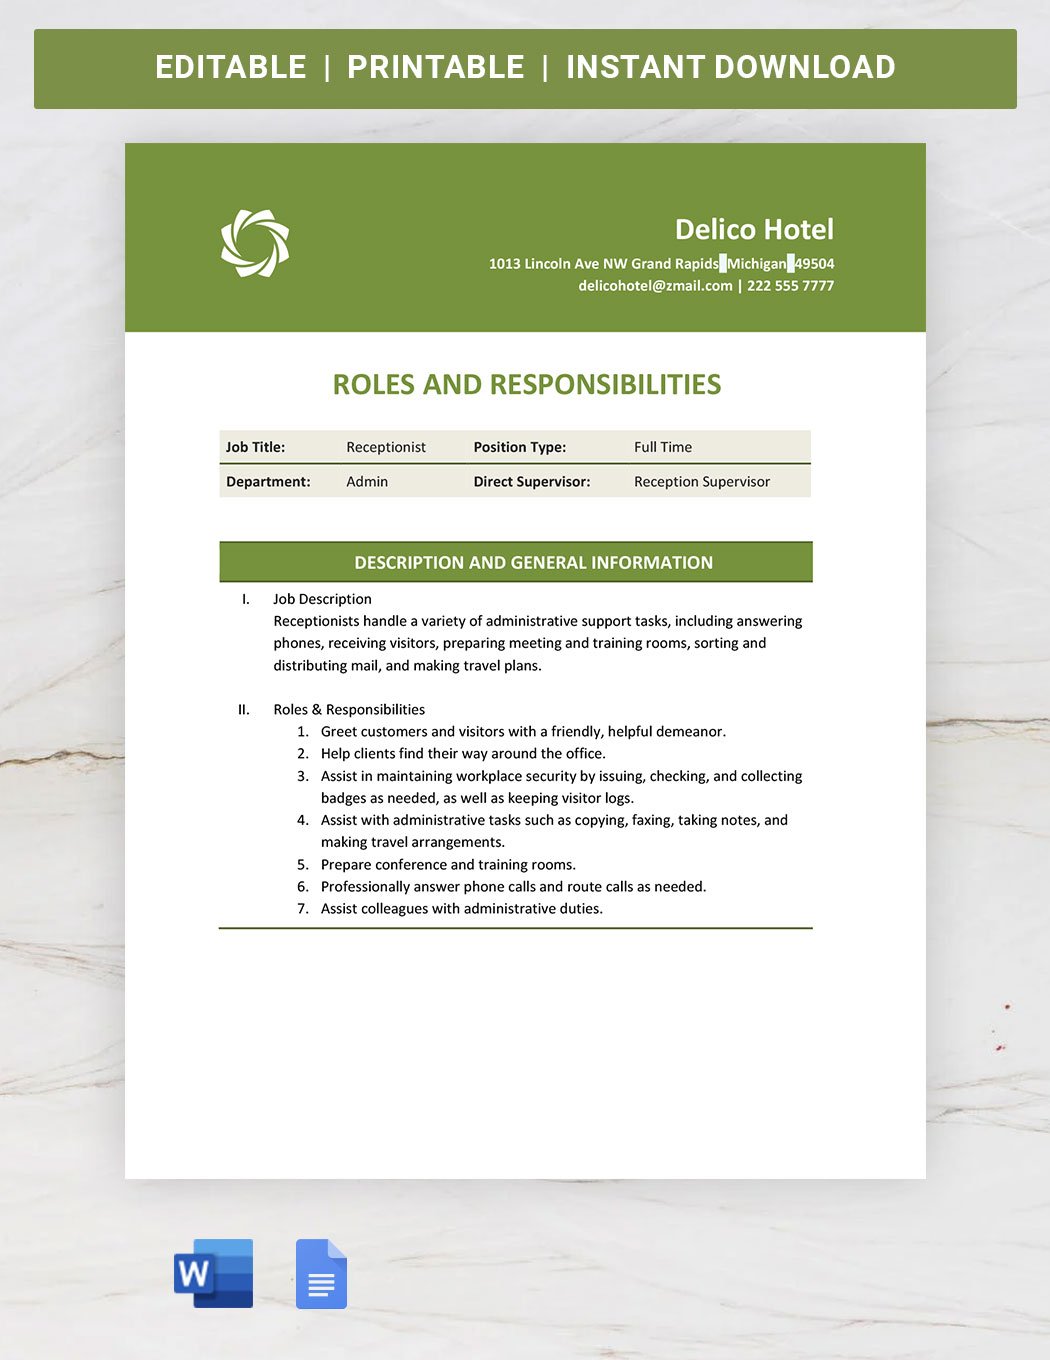 Business Roles And Responsibilities Template in Word, Google Docs